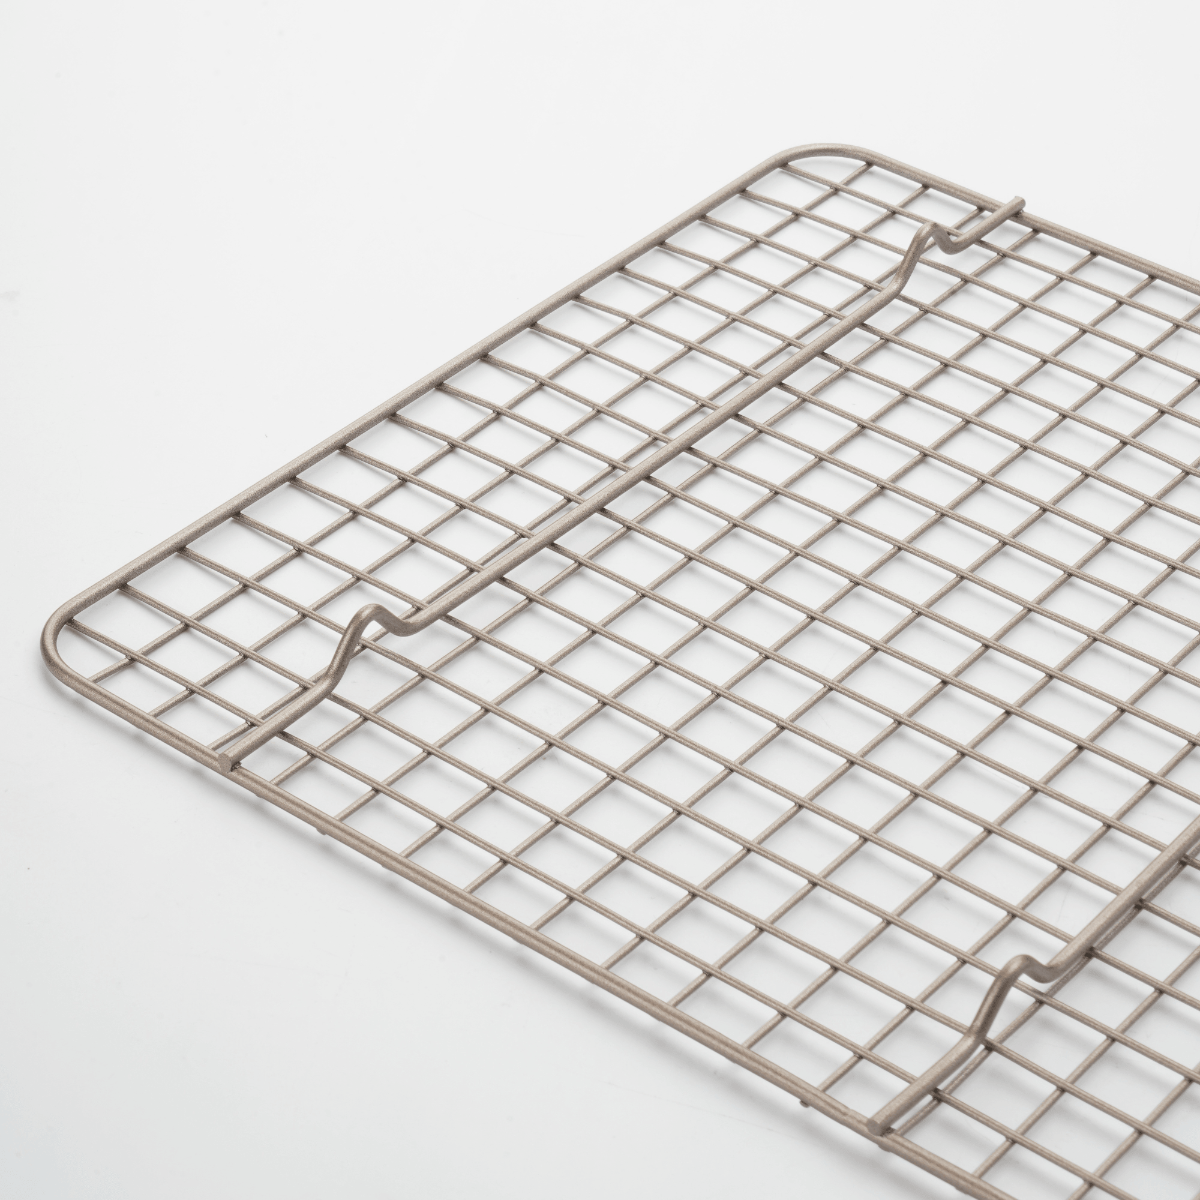 Cooling Rack - Set of 2 Stainless Steel, Oven Safe Grid Wire Cookie Cooling  R